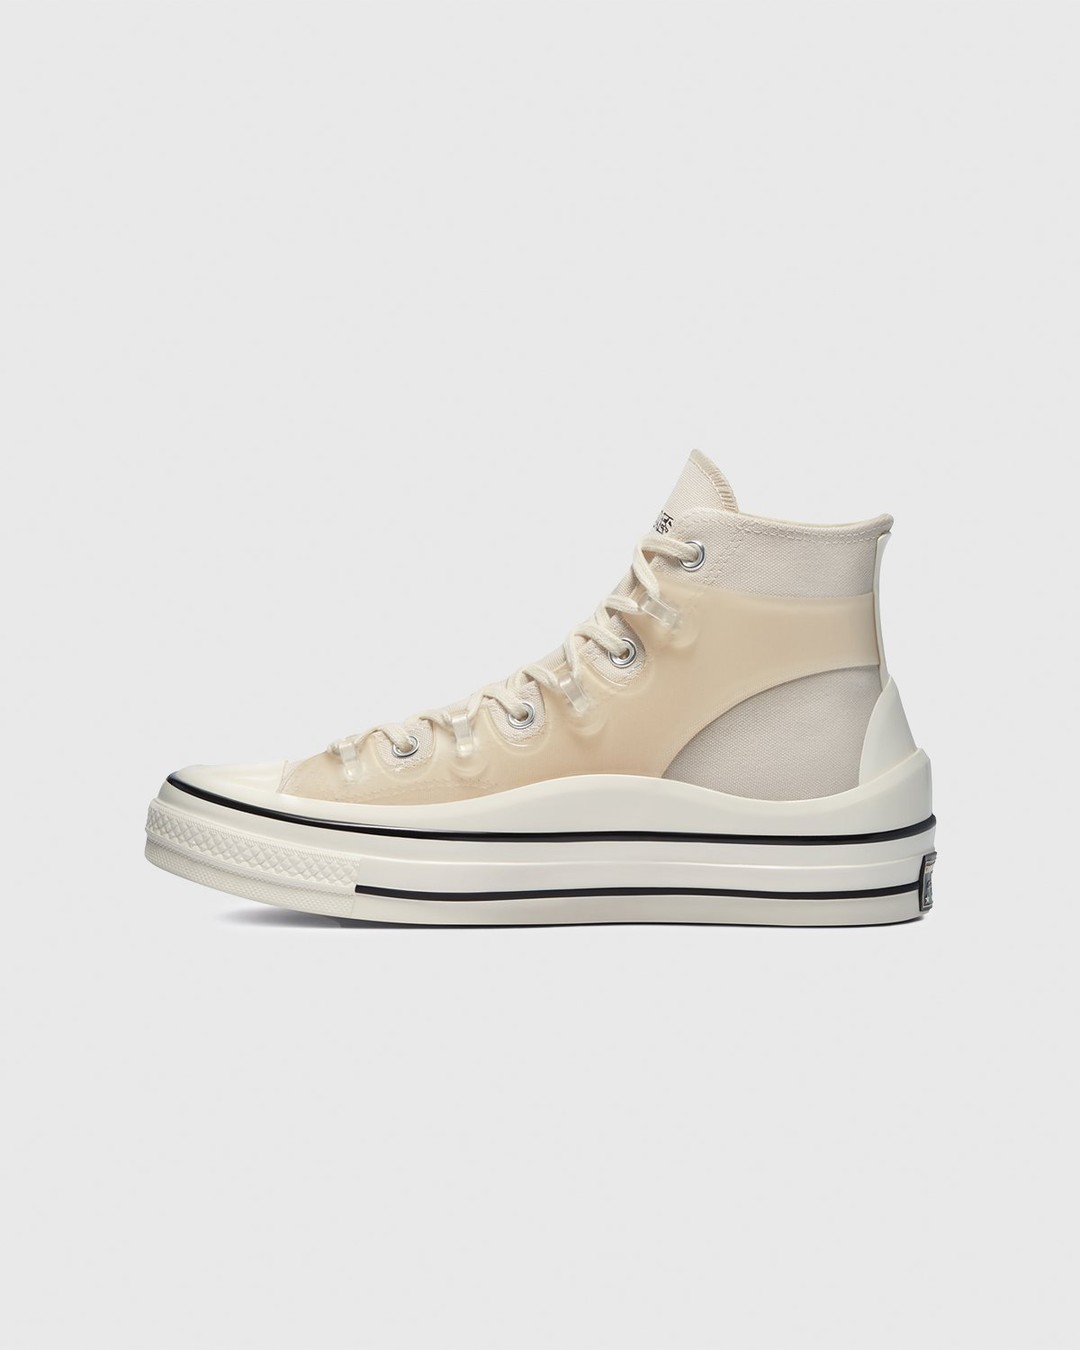 Converse x Kim Jones – Chuck 70 Utility Wave Natural Ivory - High Top Sneakers - Beige - Image 5